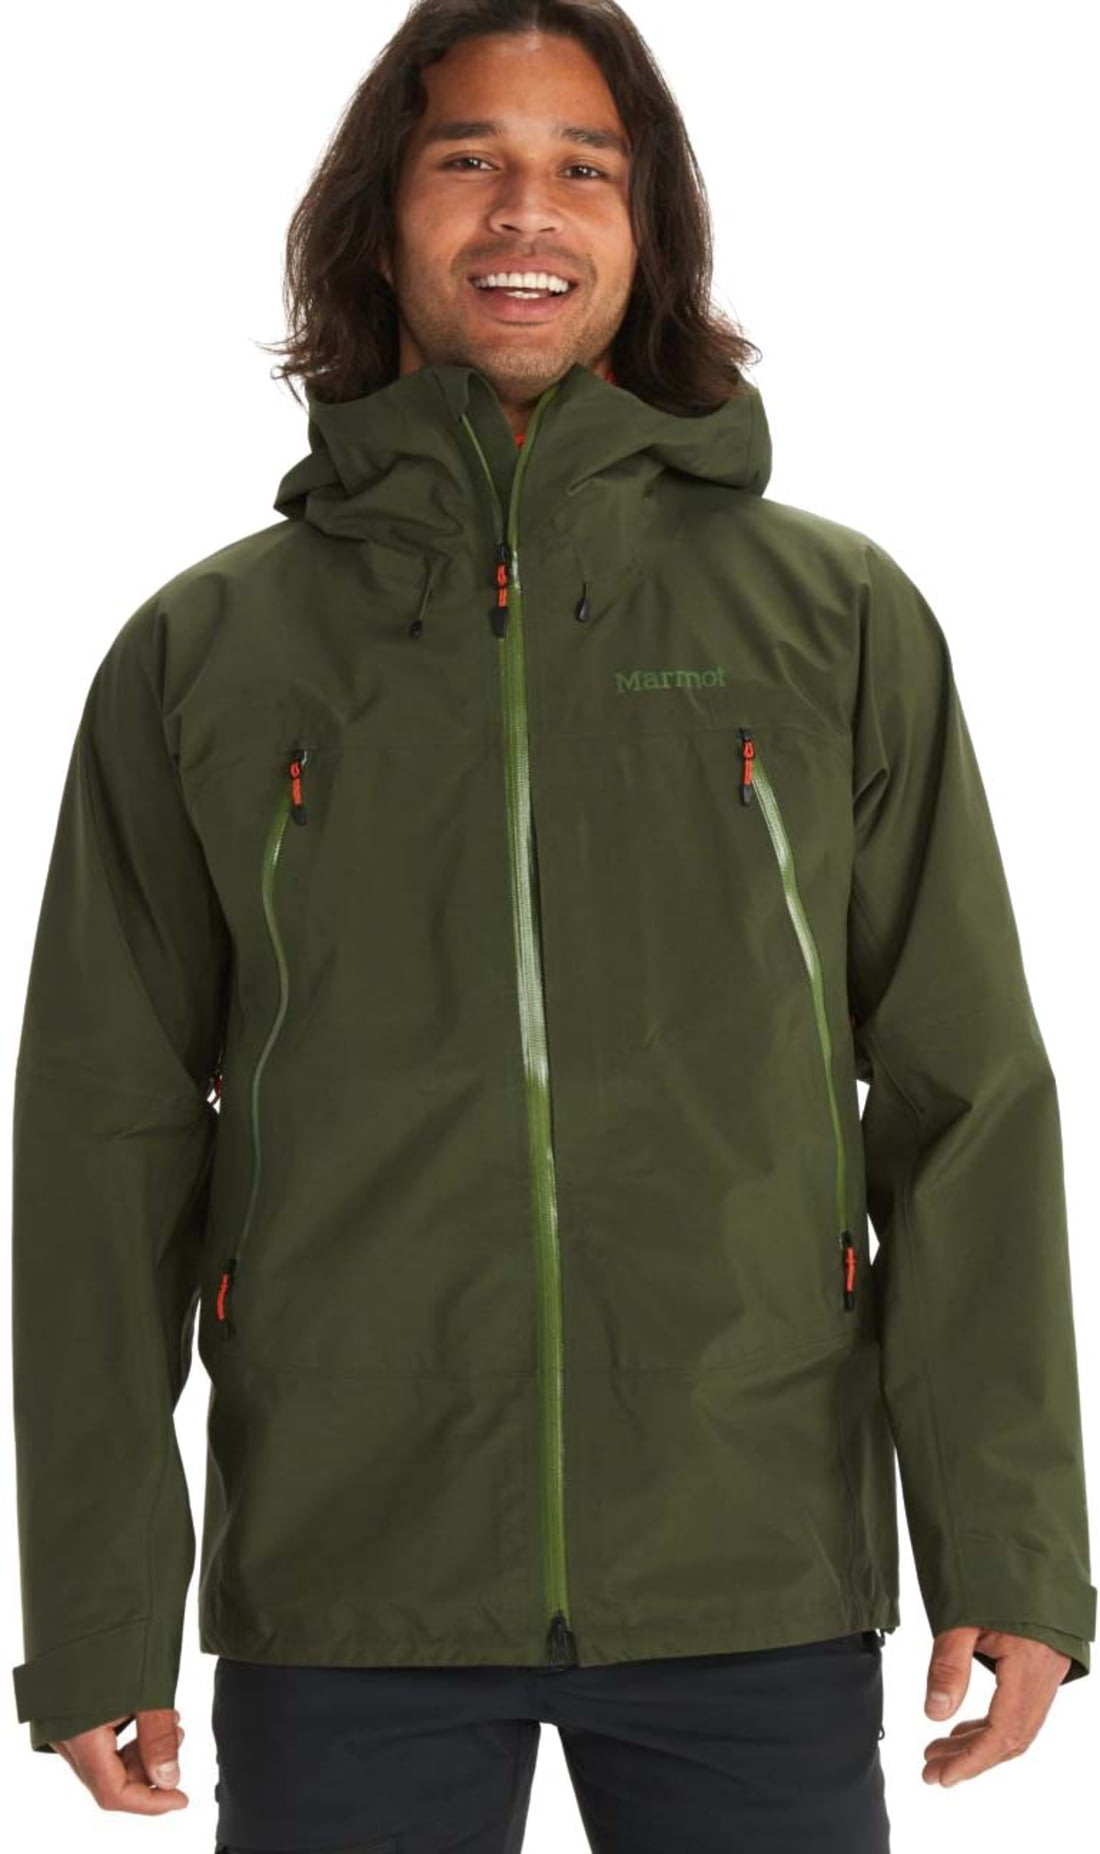 Get Marmot Alpinist GORE-TEX Jacket - Men's Sale Now at a Limited 